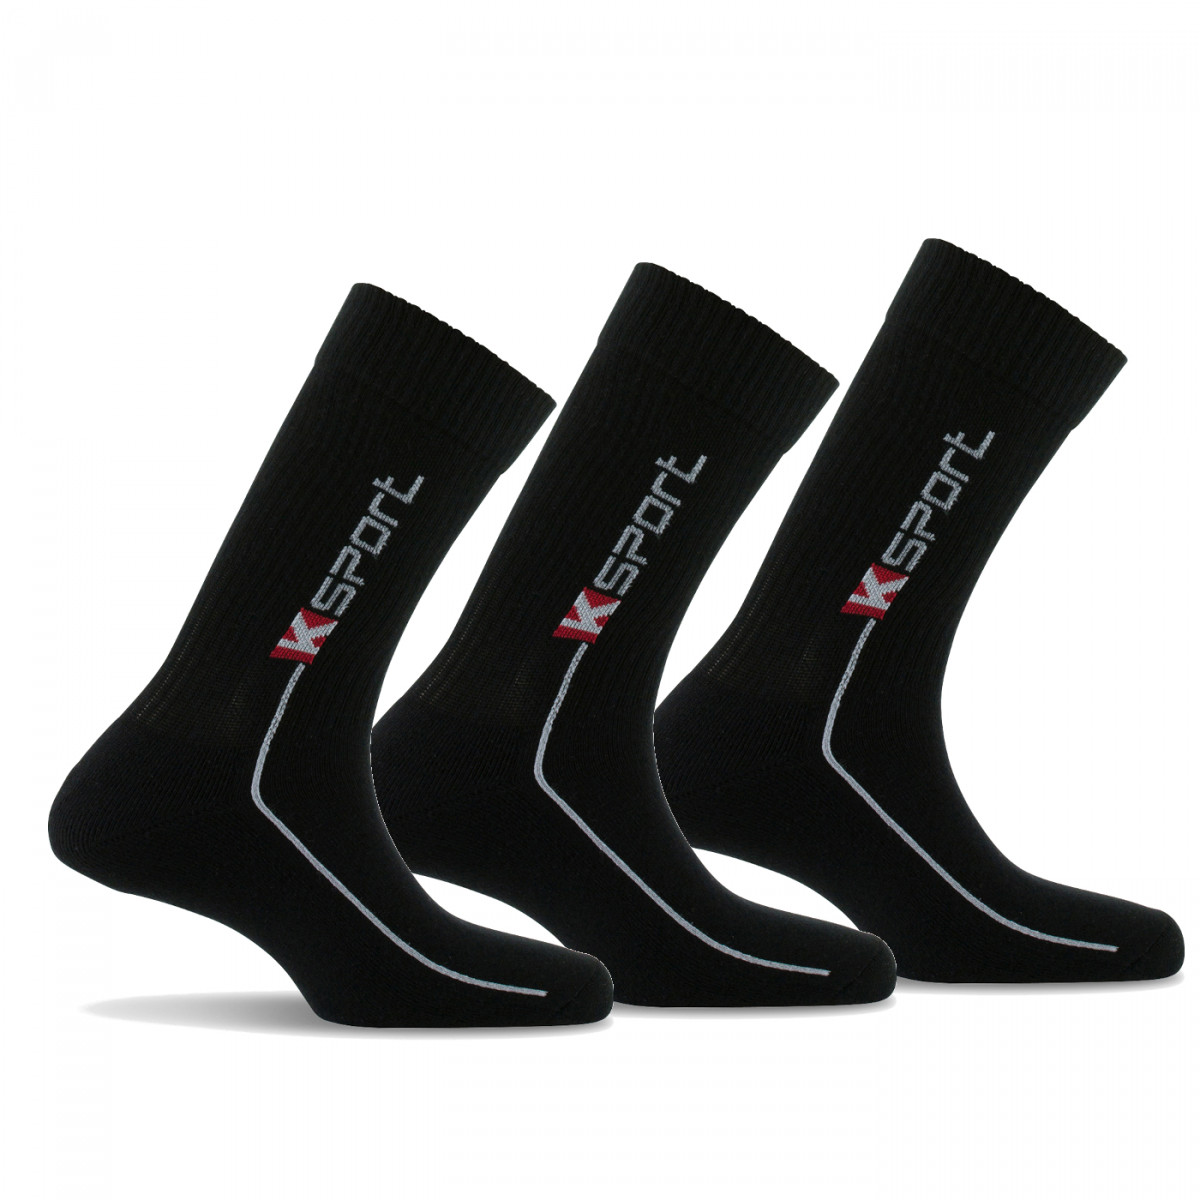 Chaussettes coton "FAST" Taille 43-46 